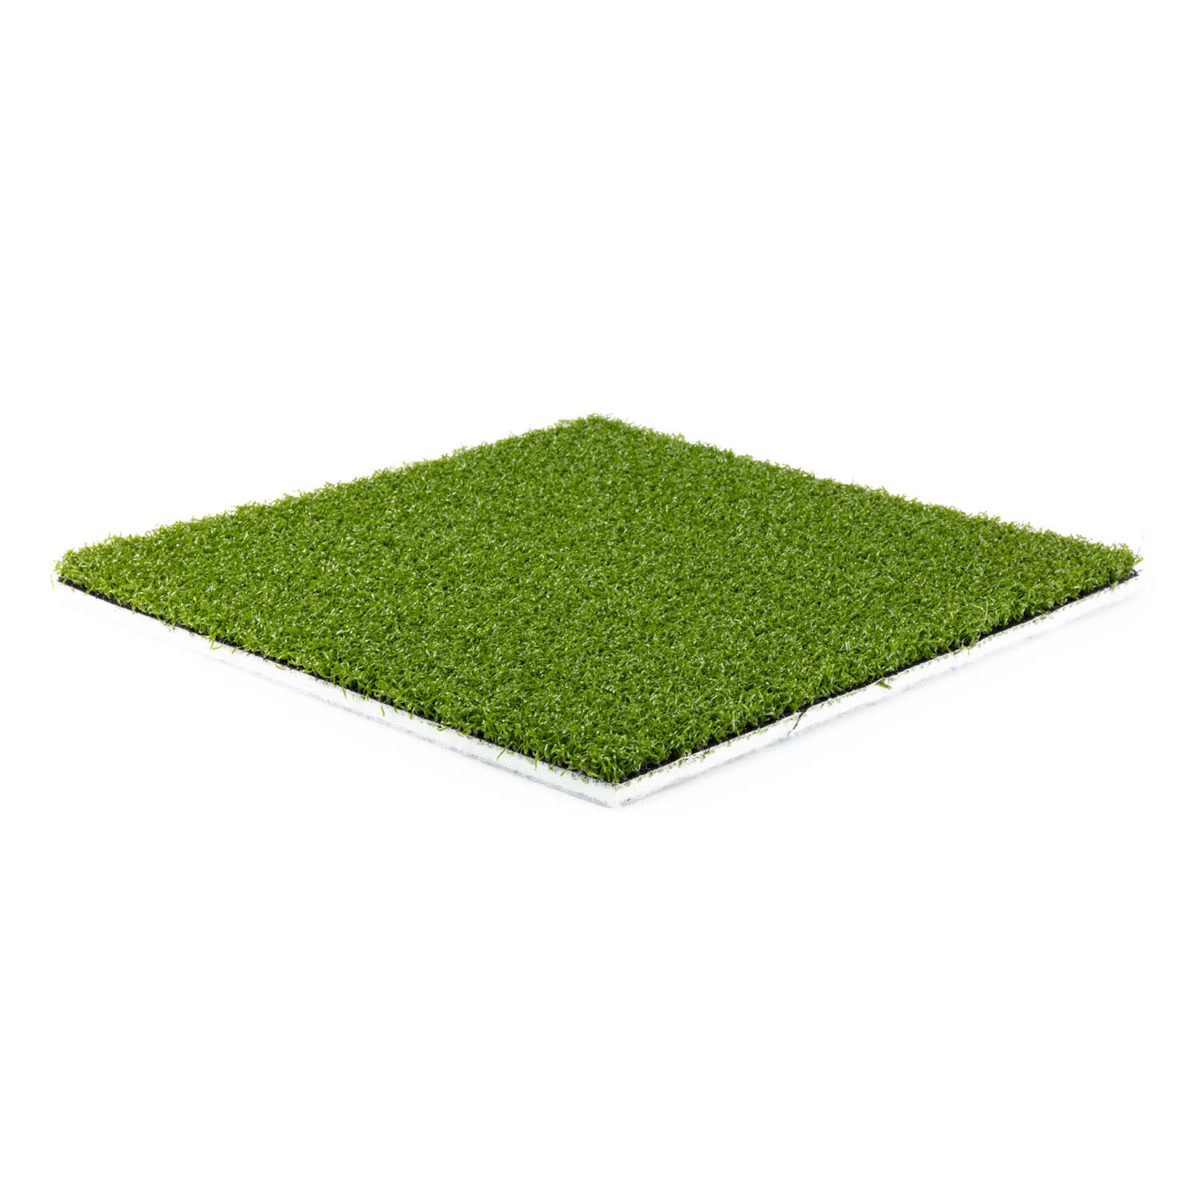 How Long Does Artificial Turf Last?